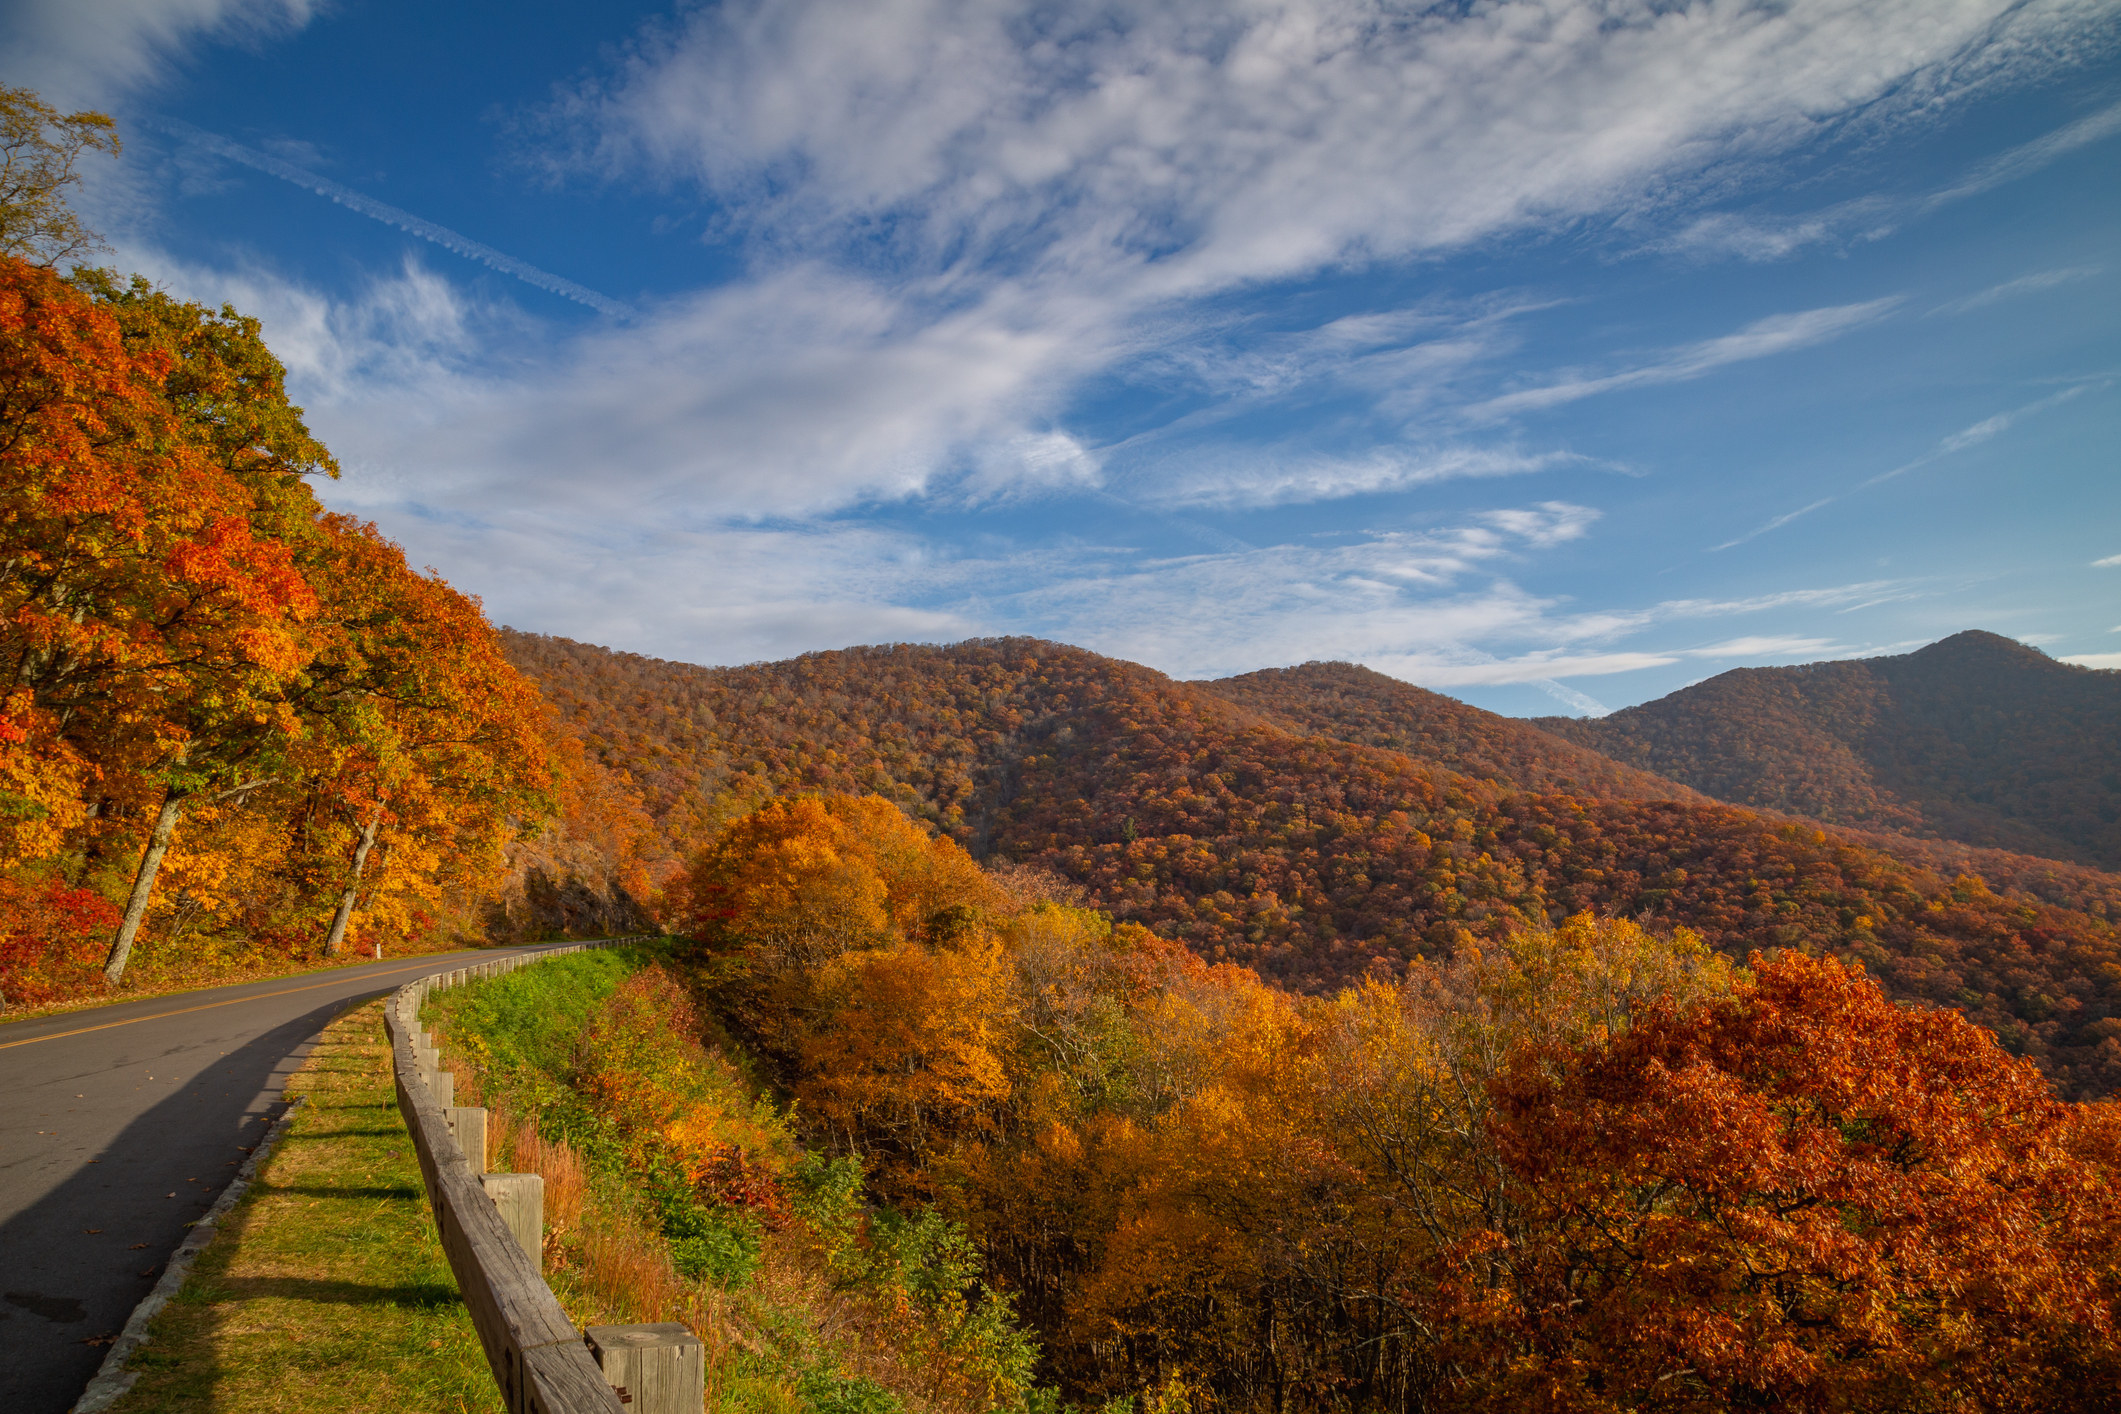 Autumn color from the mountainside of the Blue Ridge Parkway.